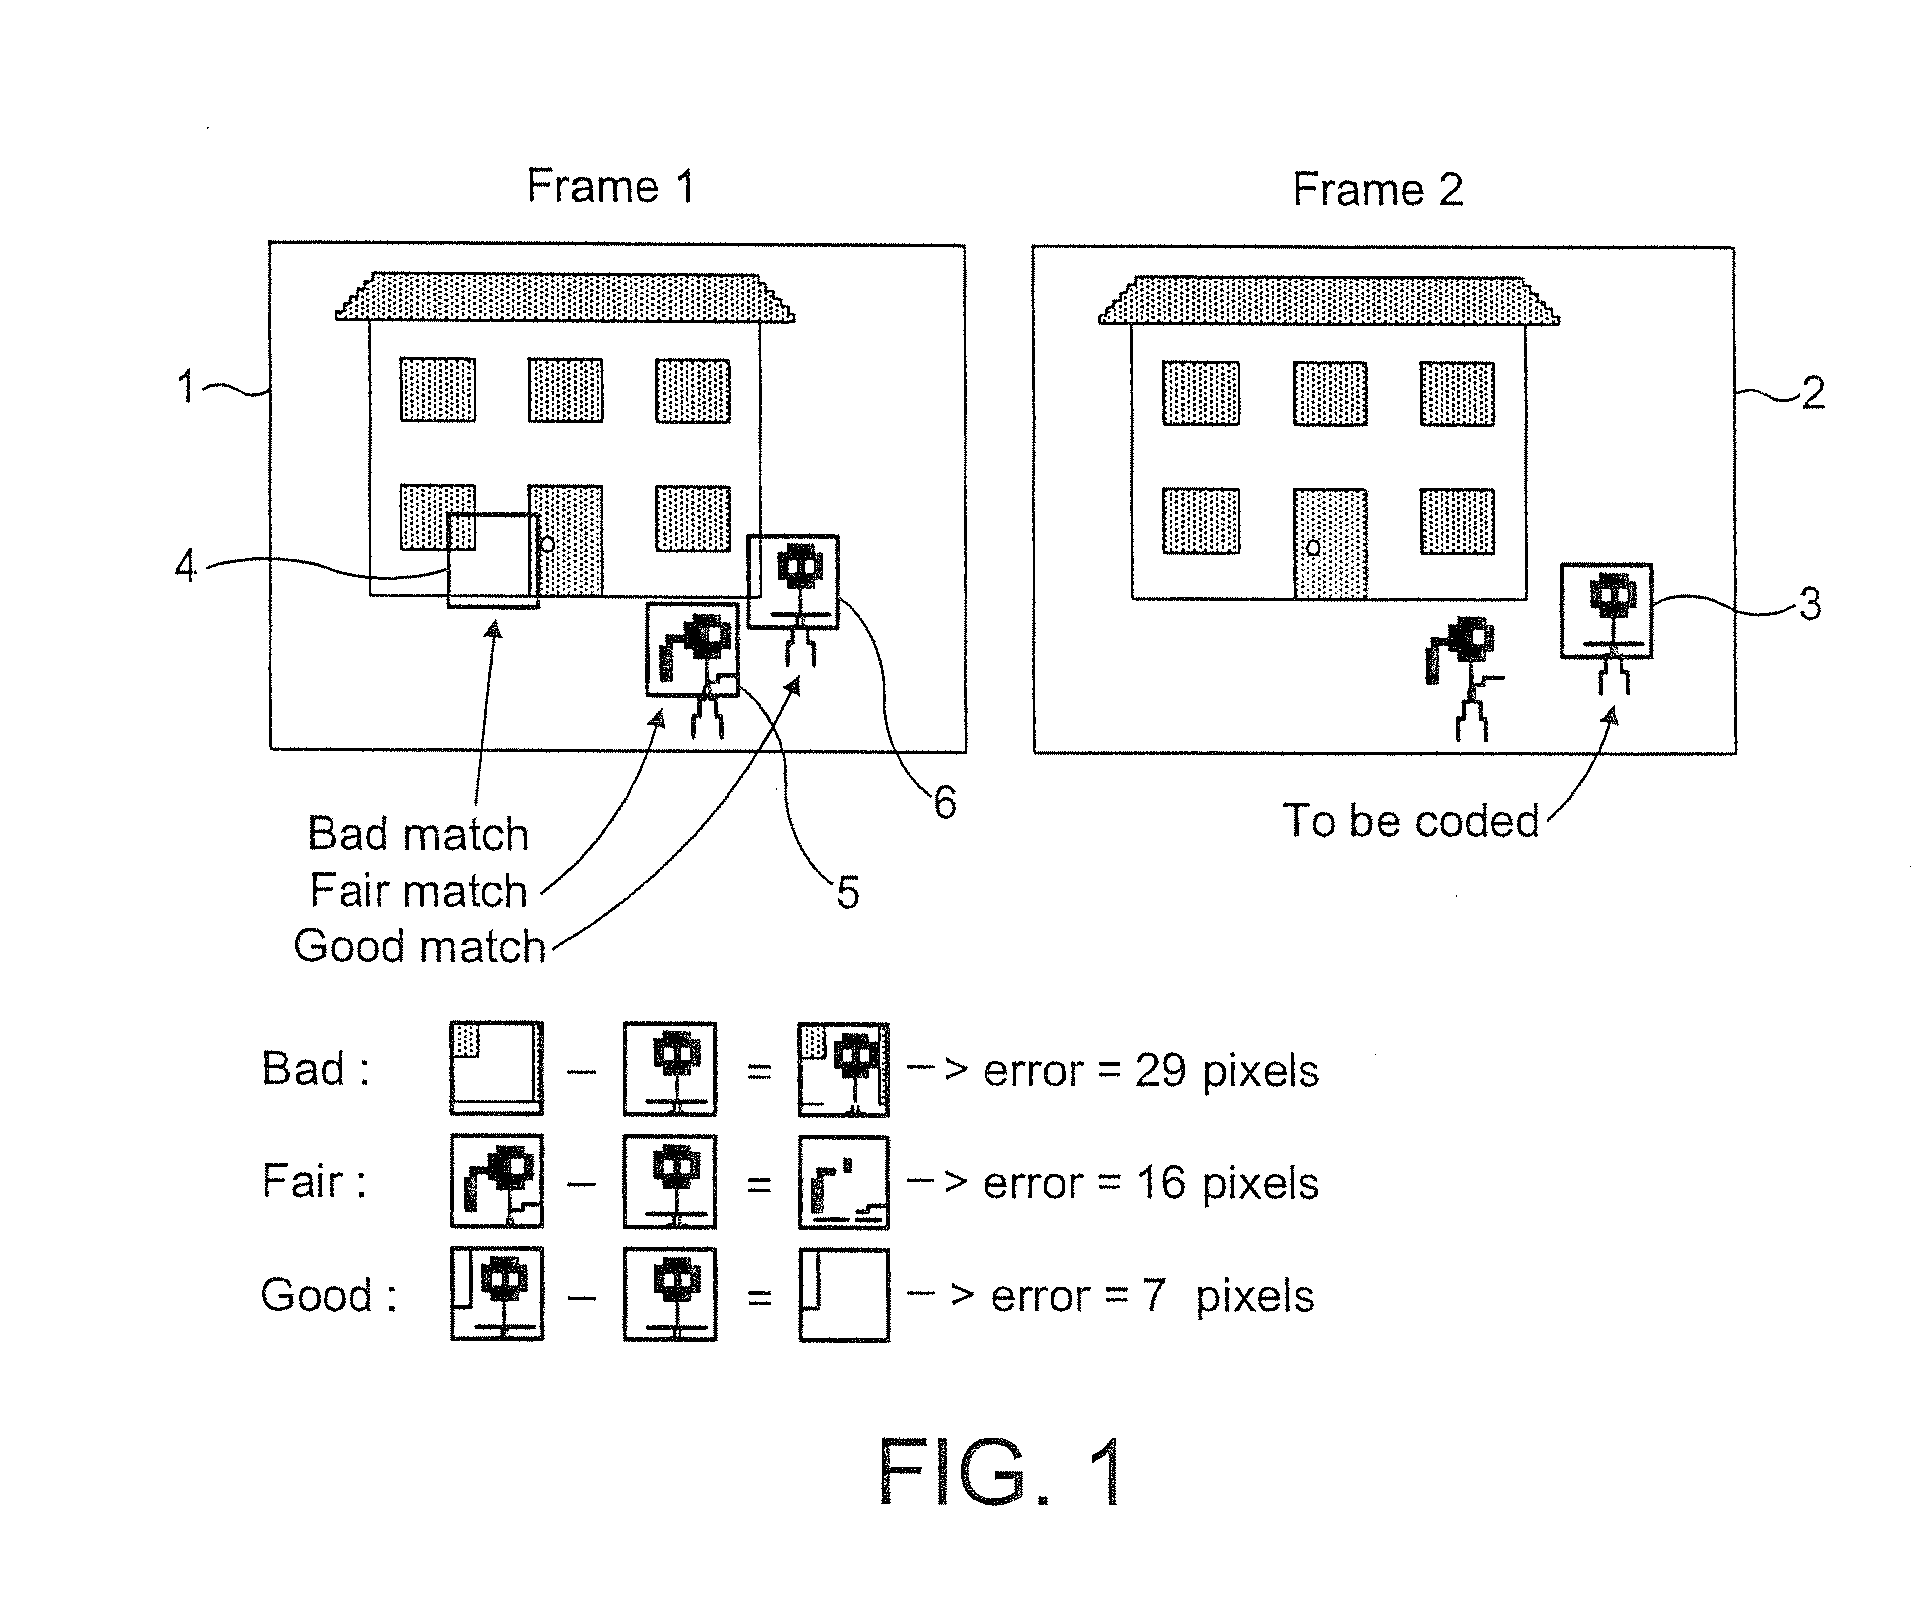 Differential encoding using a 3D graphics processor